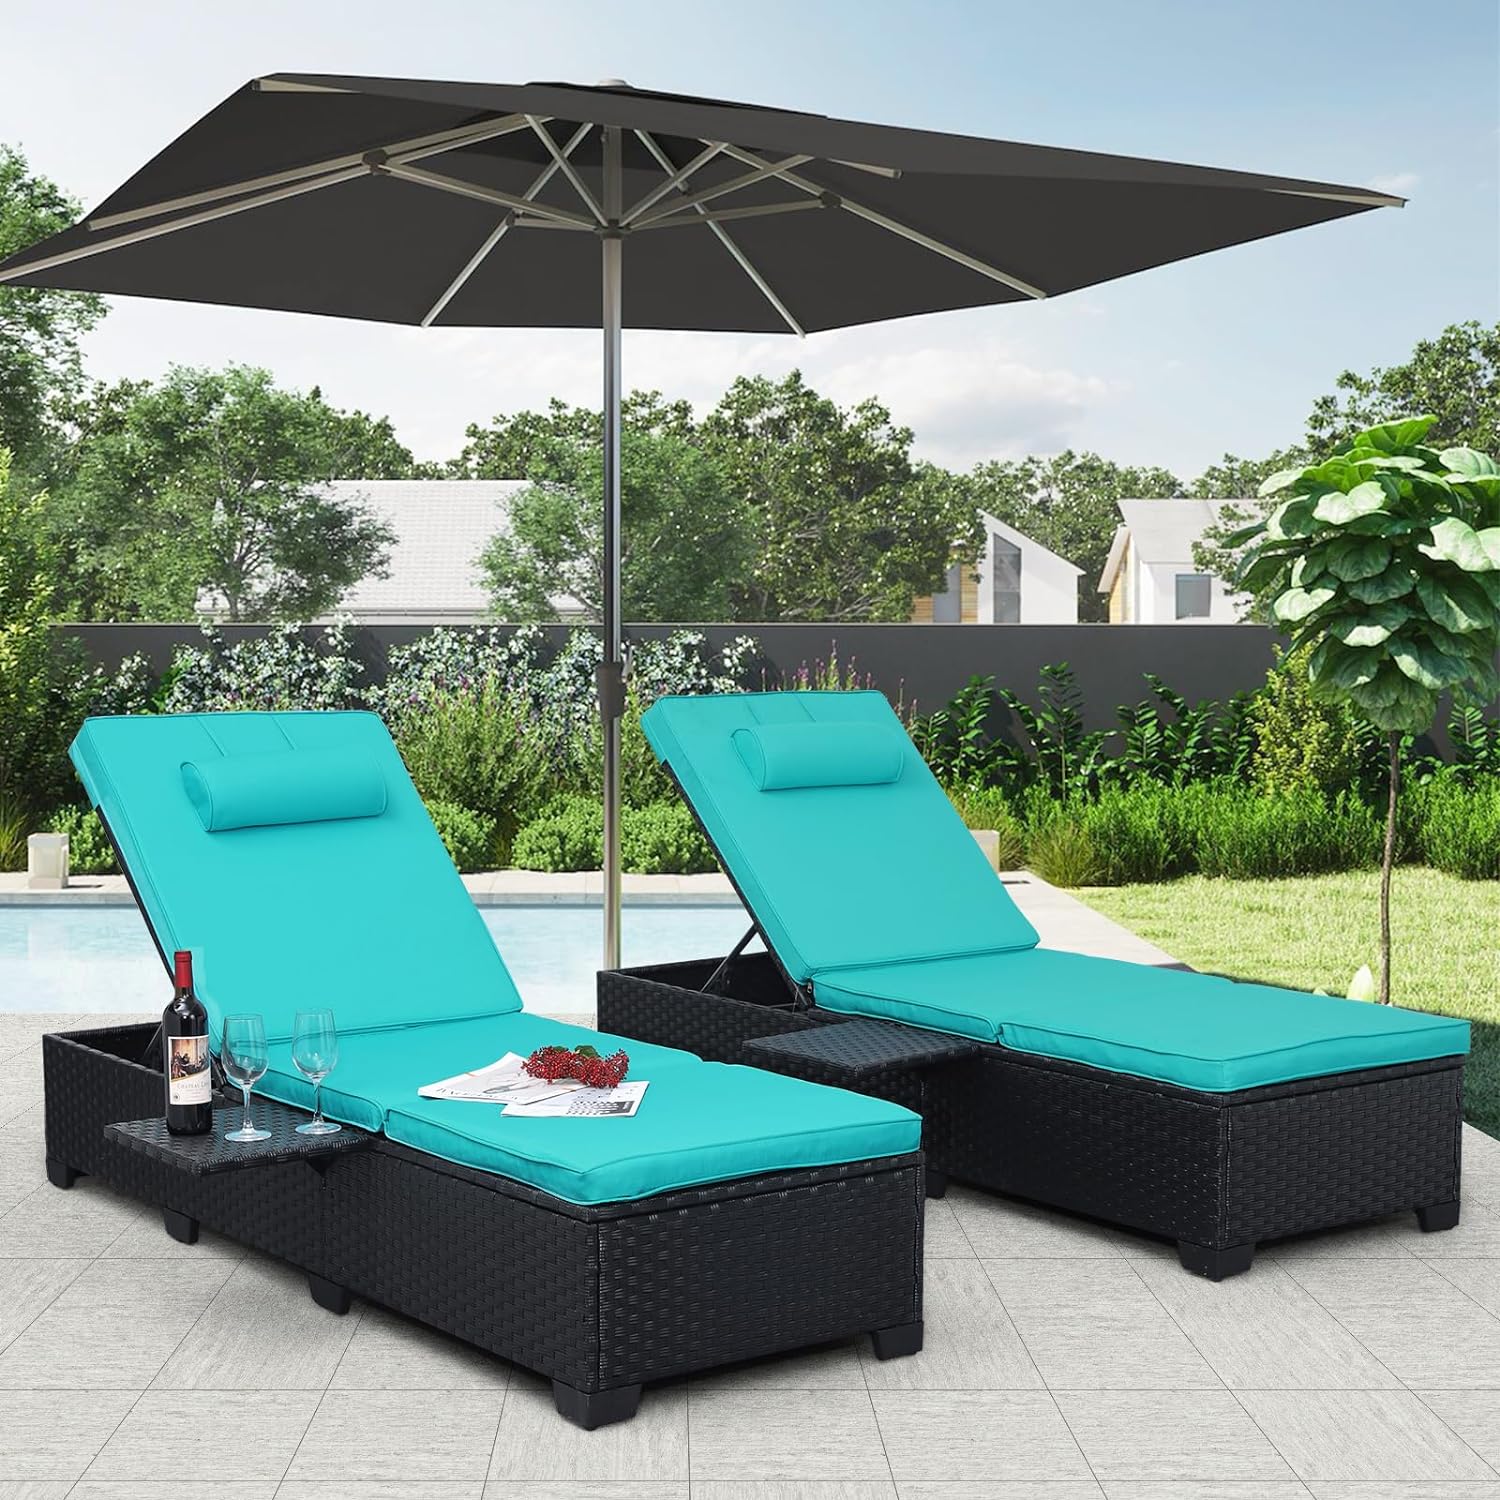 WAROOM Outdoor PE Wicker Chaise Lounge Chairs for Outside Patio Furniture Set of 2 Black Rattan Double Reclining Sunbathing Chair Adjustable Backrest Poolside Recliners with Turquoise Cushion